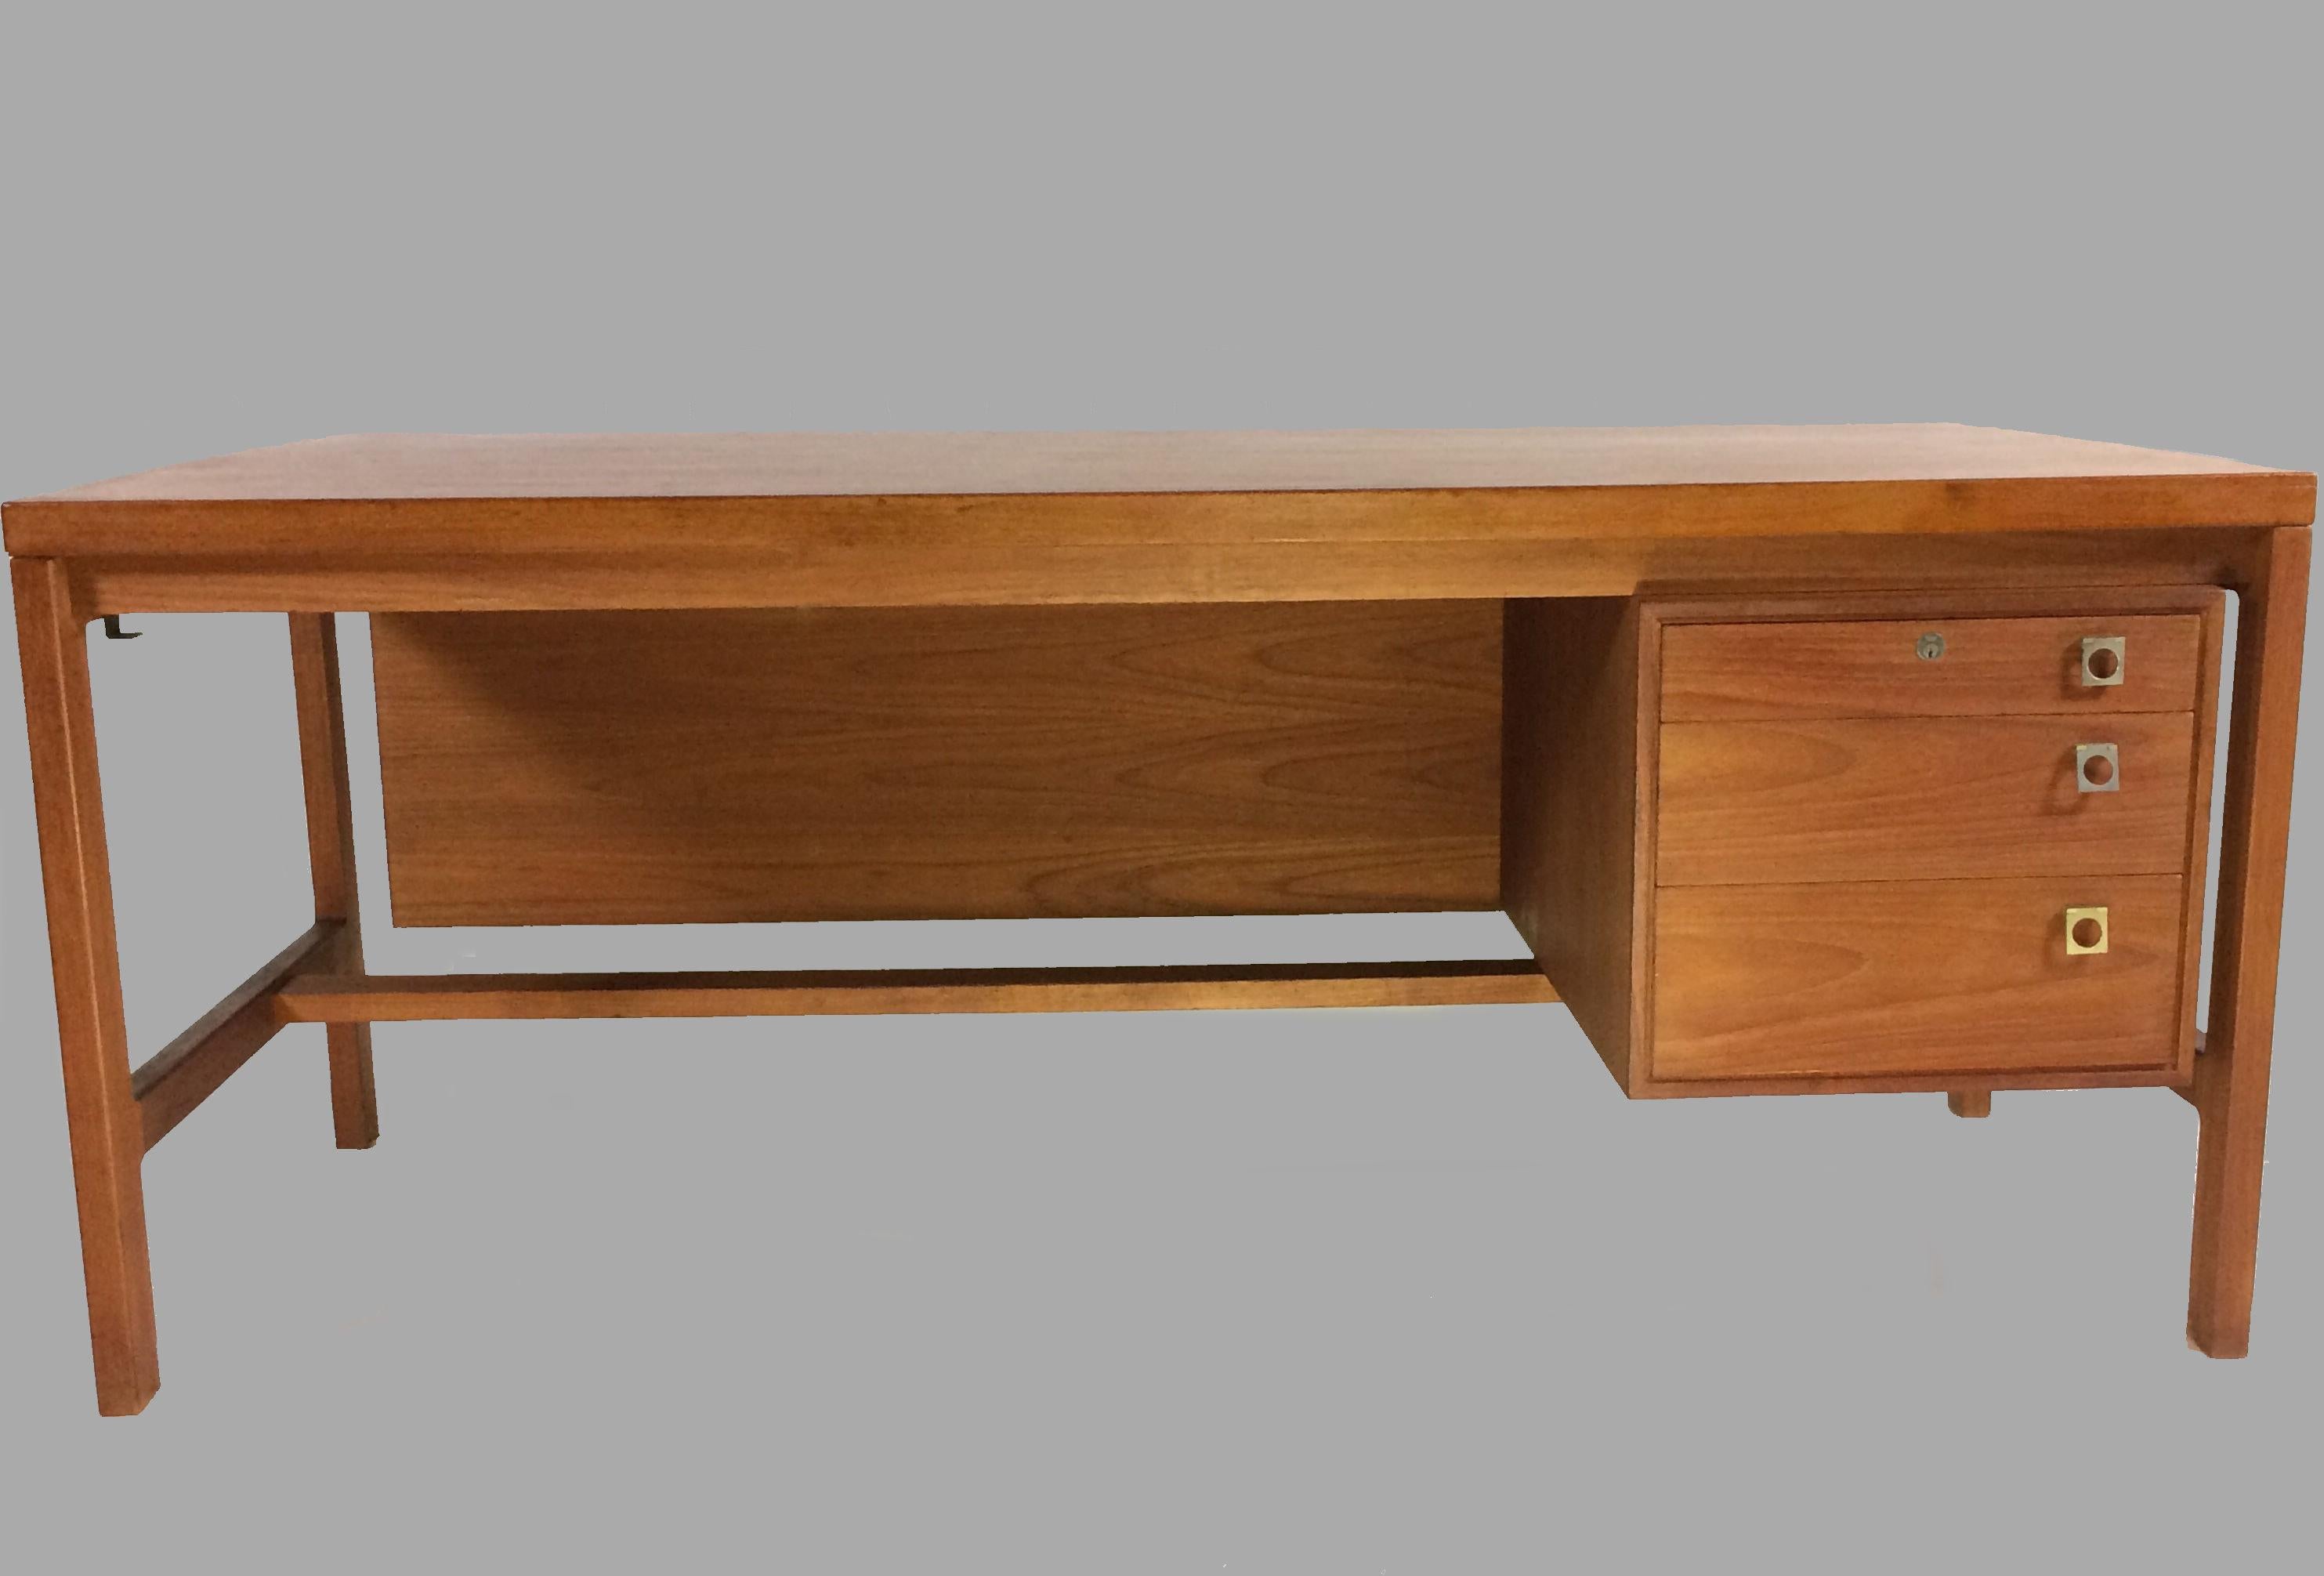 Large executive desk in teak designed by Arne Vodder for Sibast Møbler.

The spacious desk is well designed and not least well crafted not only by hand by also by heart to create not only a strong structure but also to bring out the grain of the